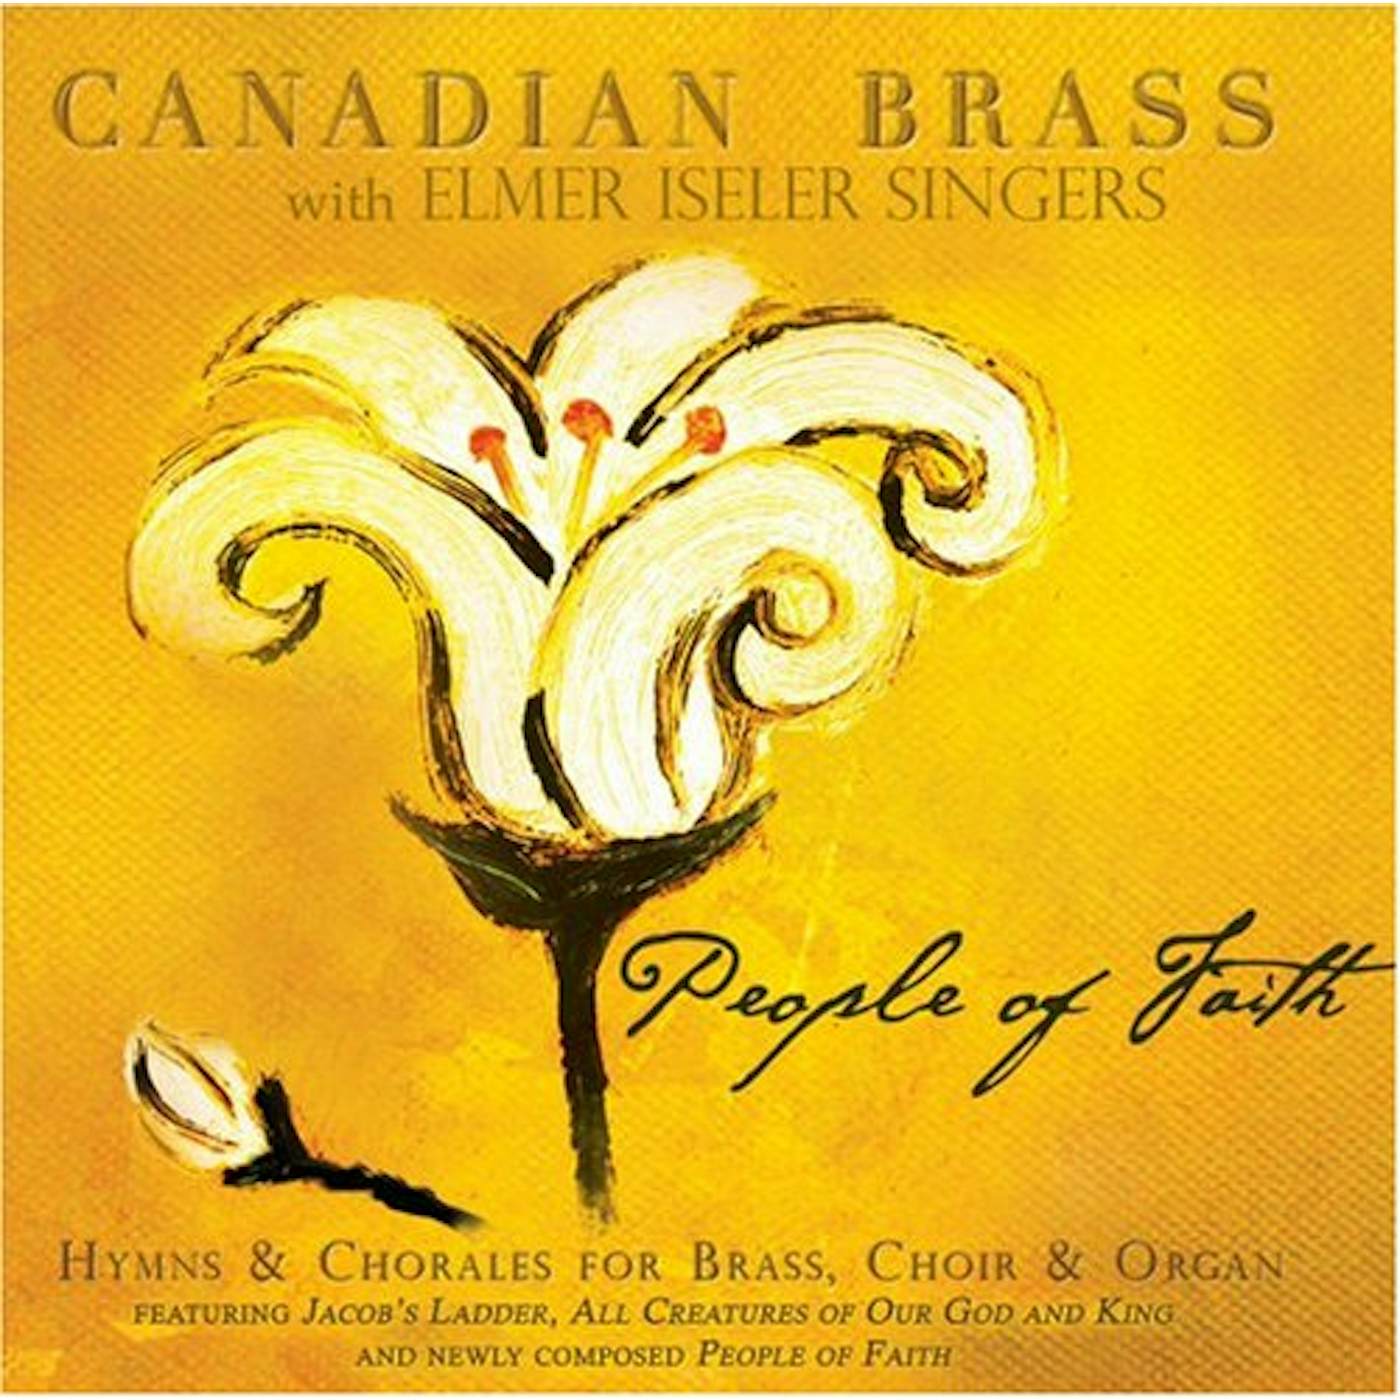 Canadian Brass PEOPLE OF FAITH CD